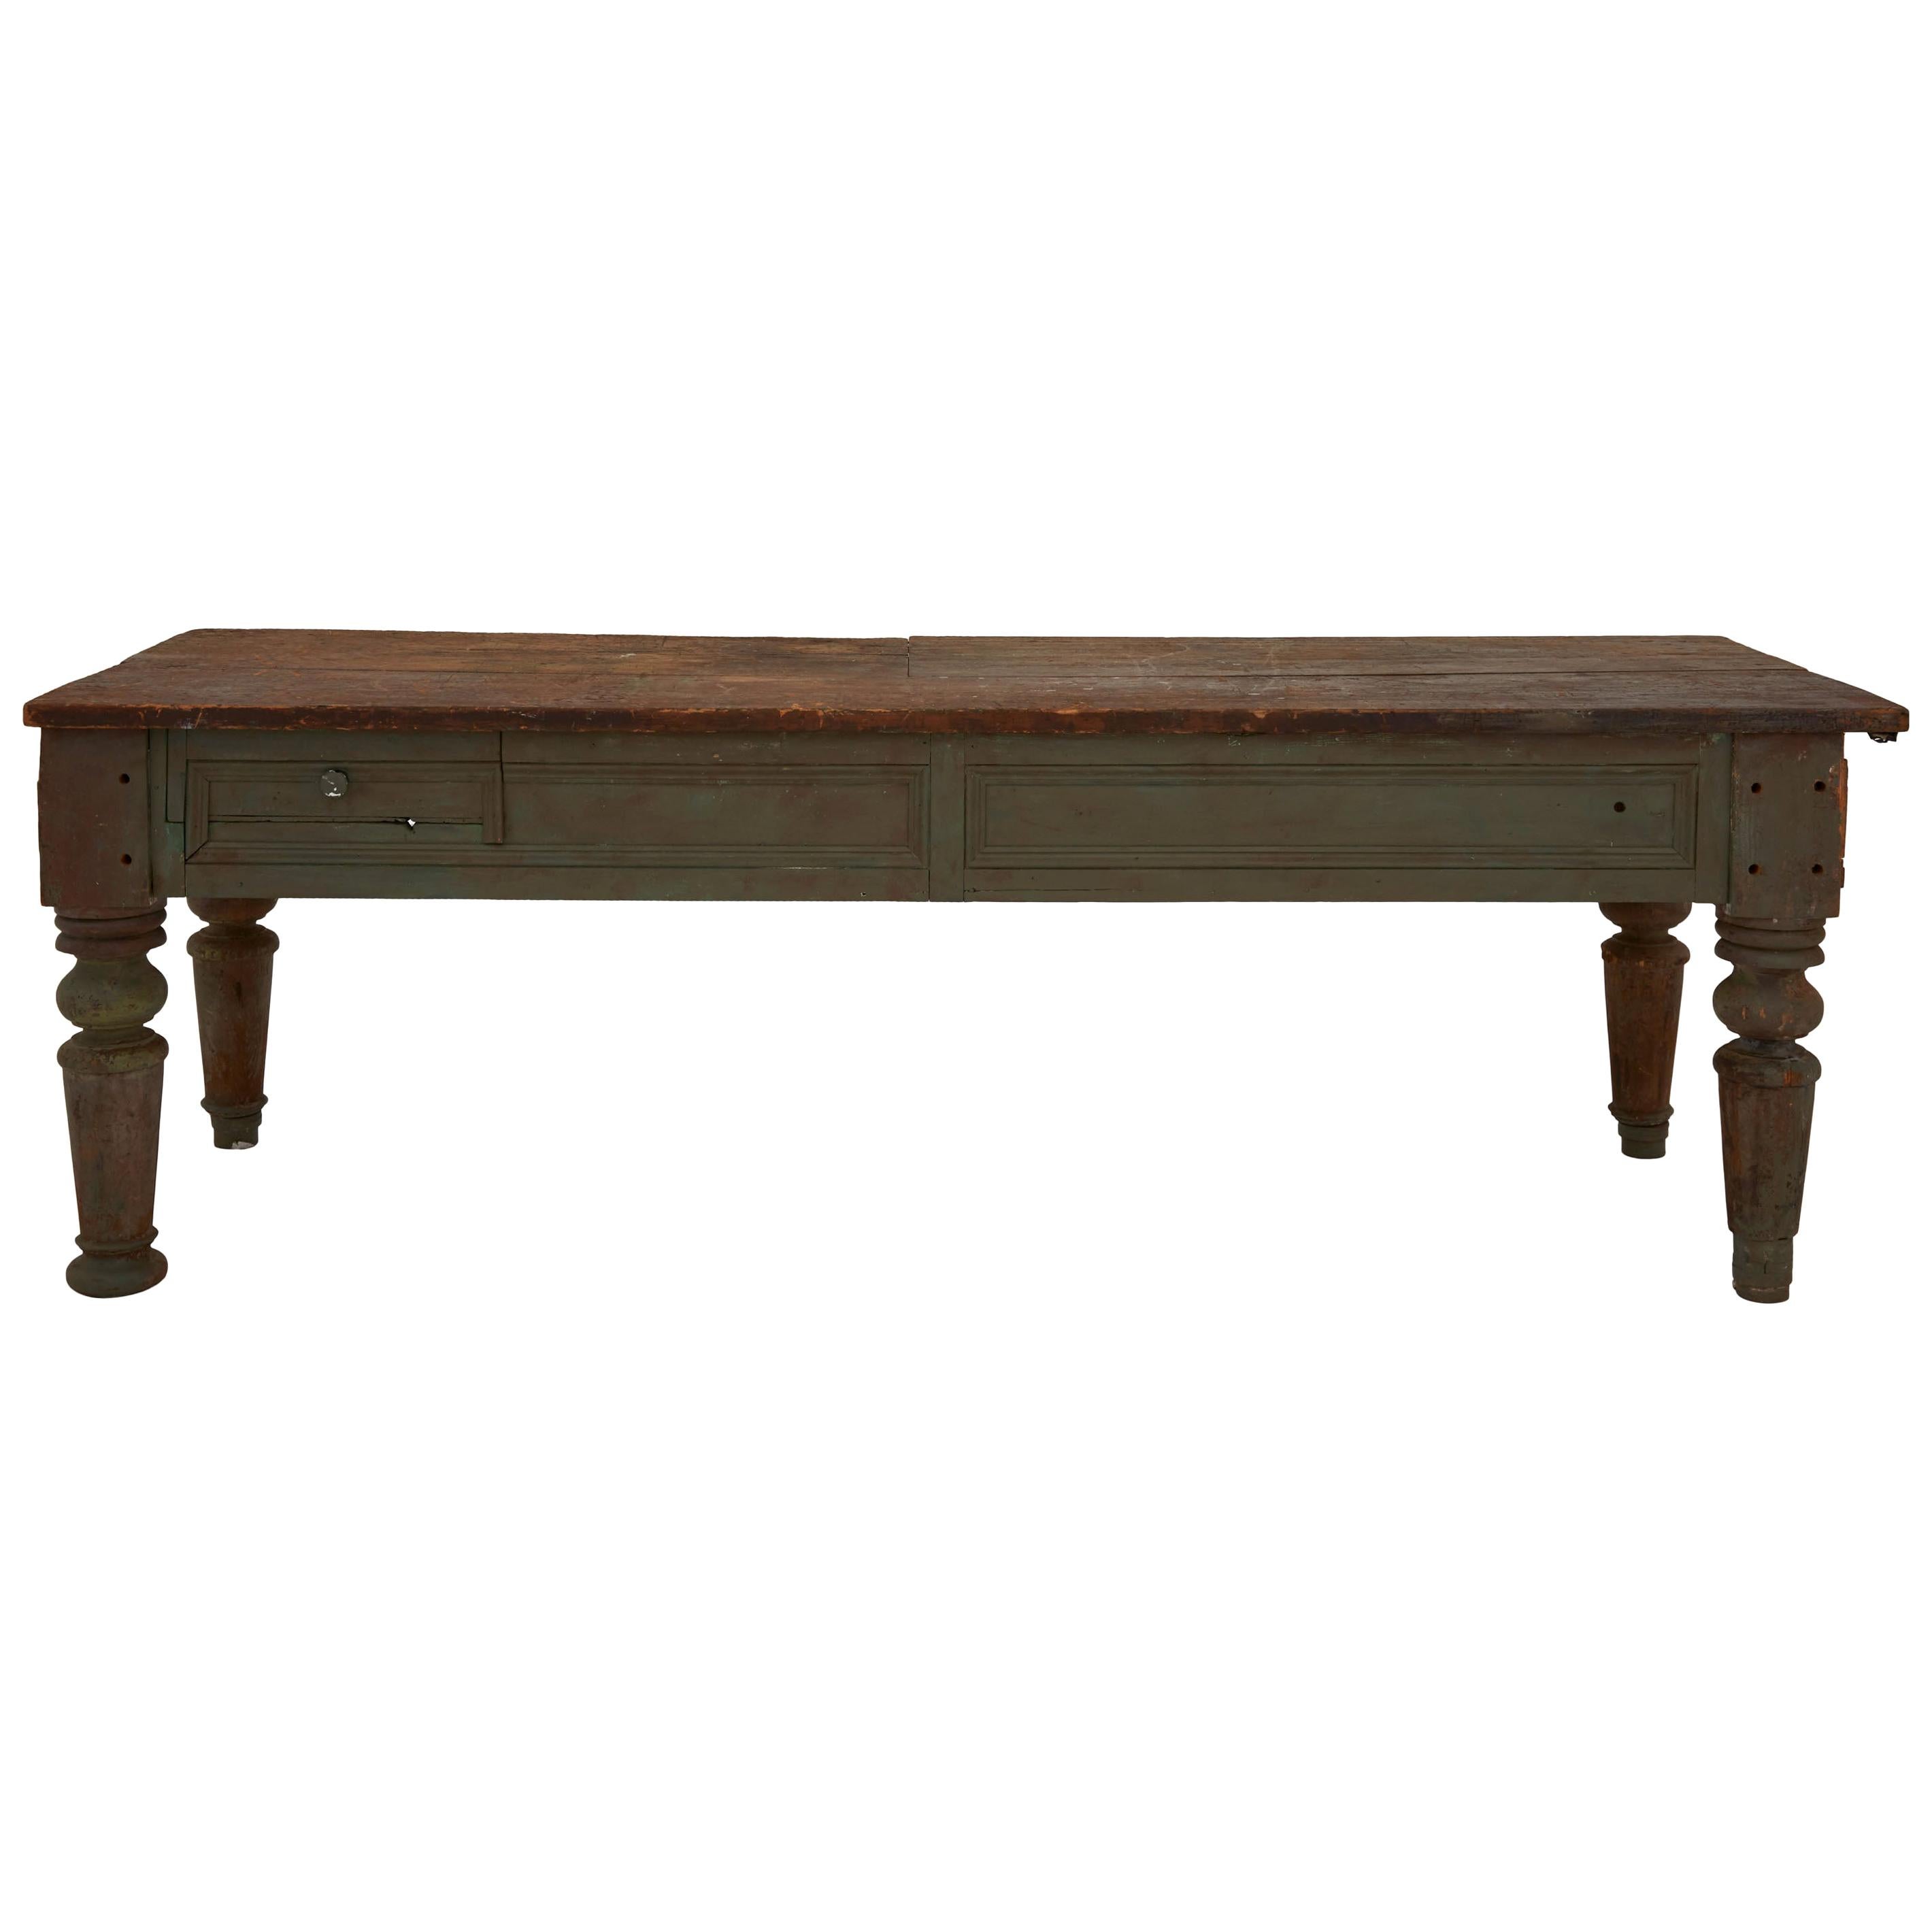 Late 19th Century Painted Wood Farm Table For Sale